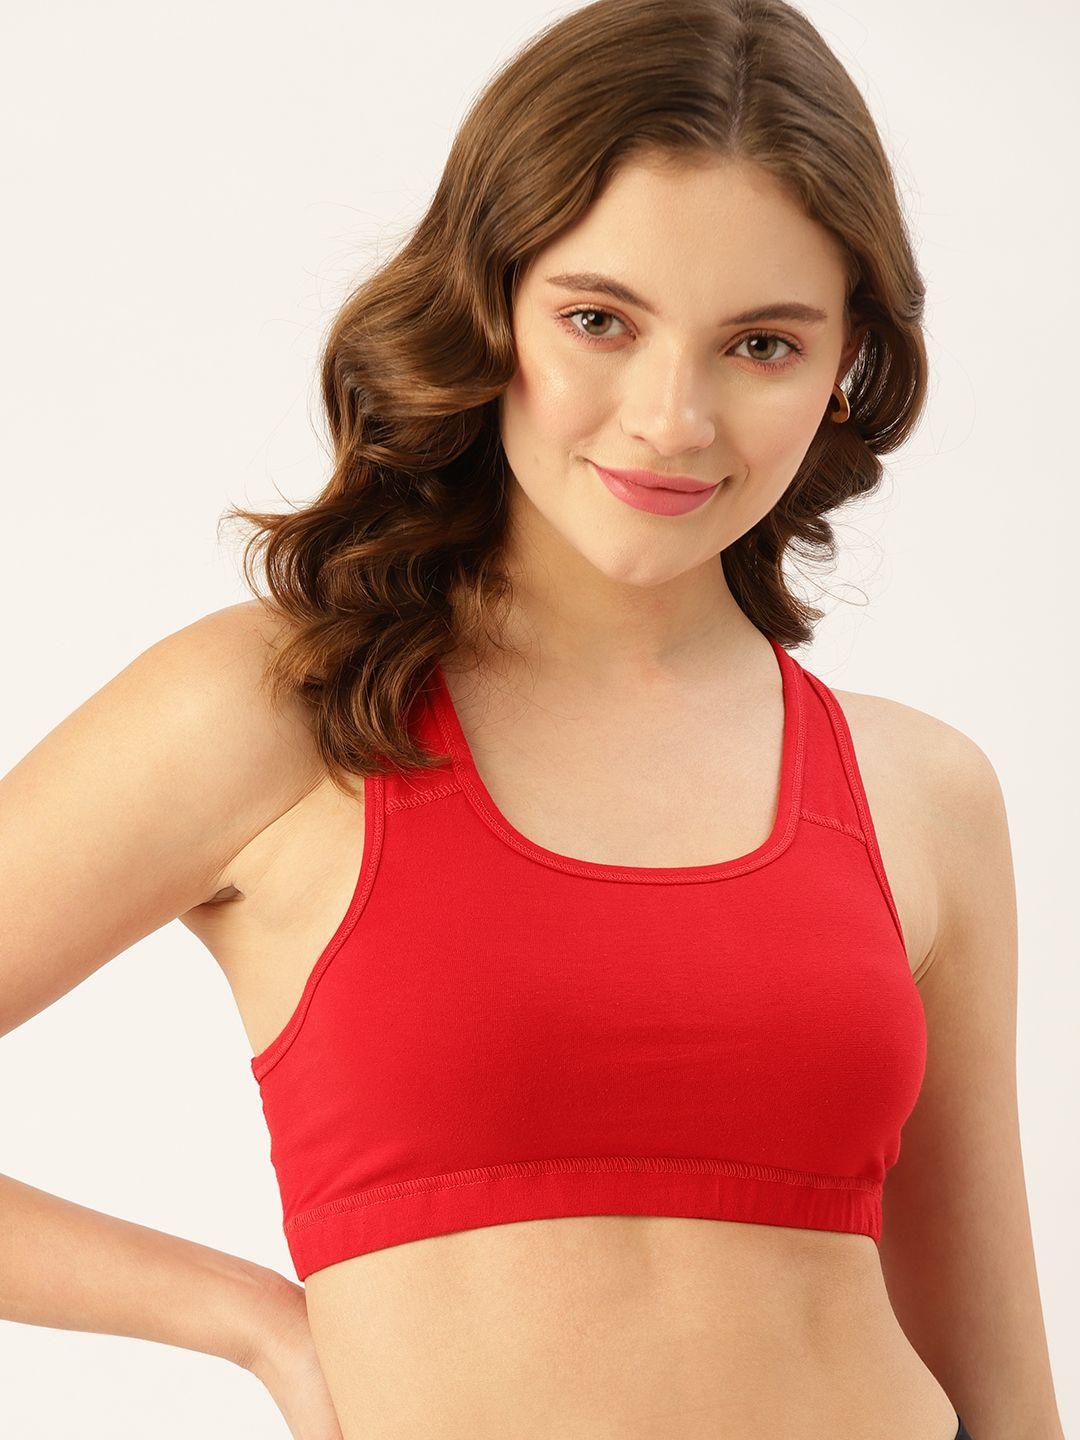 dressberry red sports bra non-wired non-padded